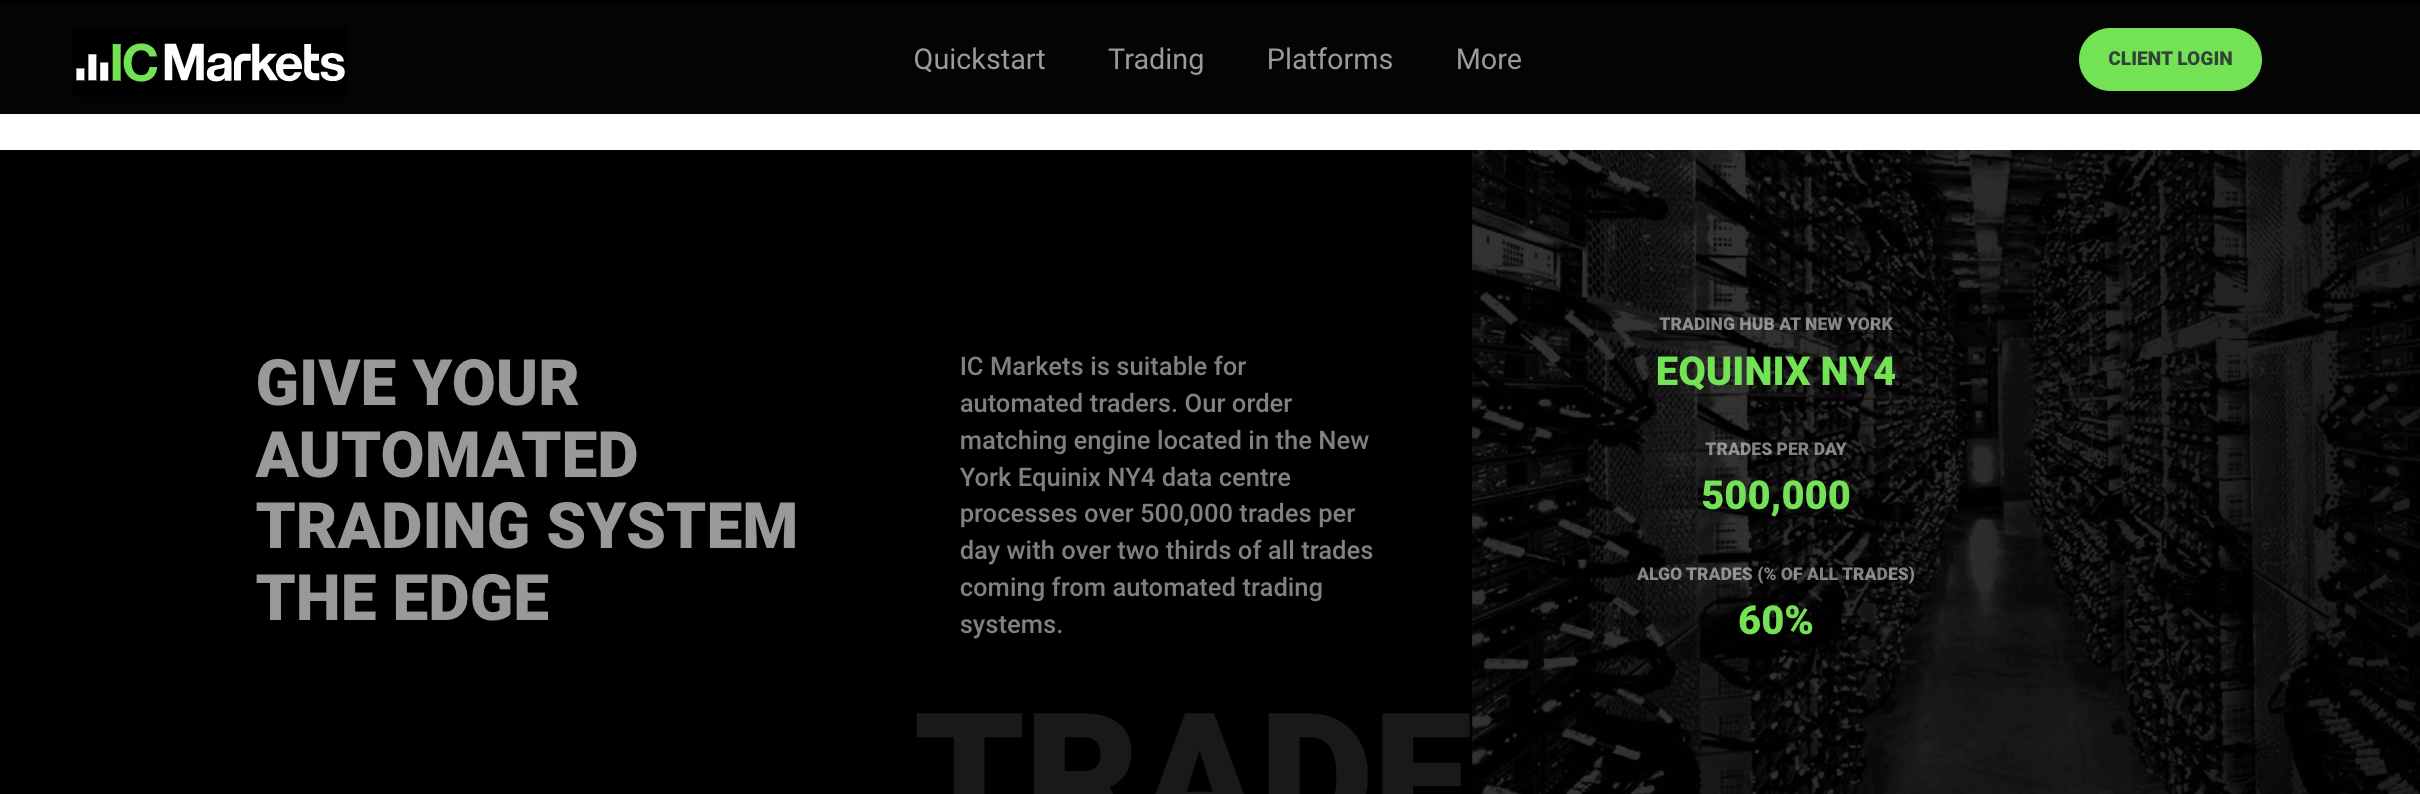 The official website of the forex broker IC Markets